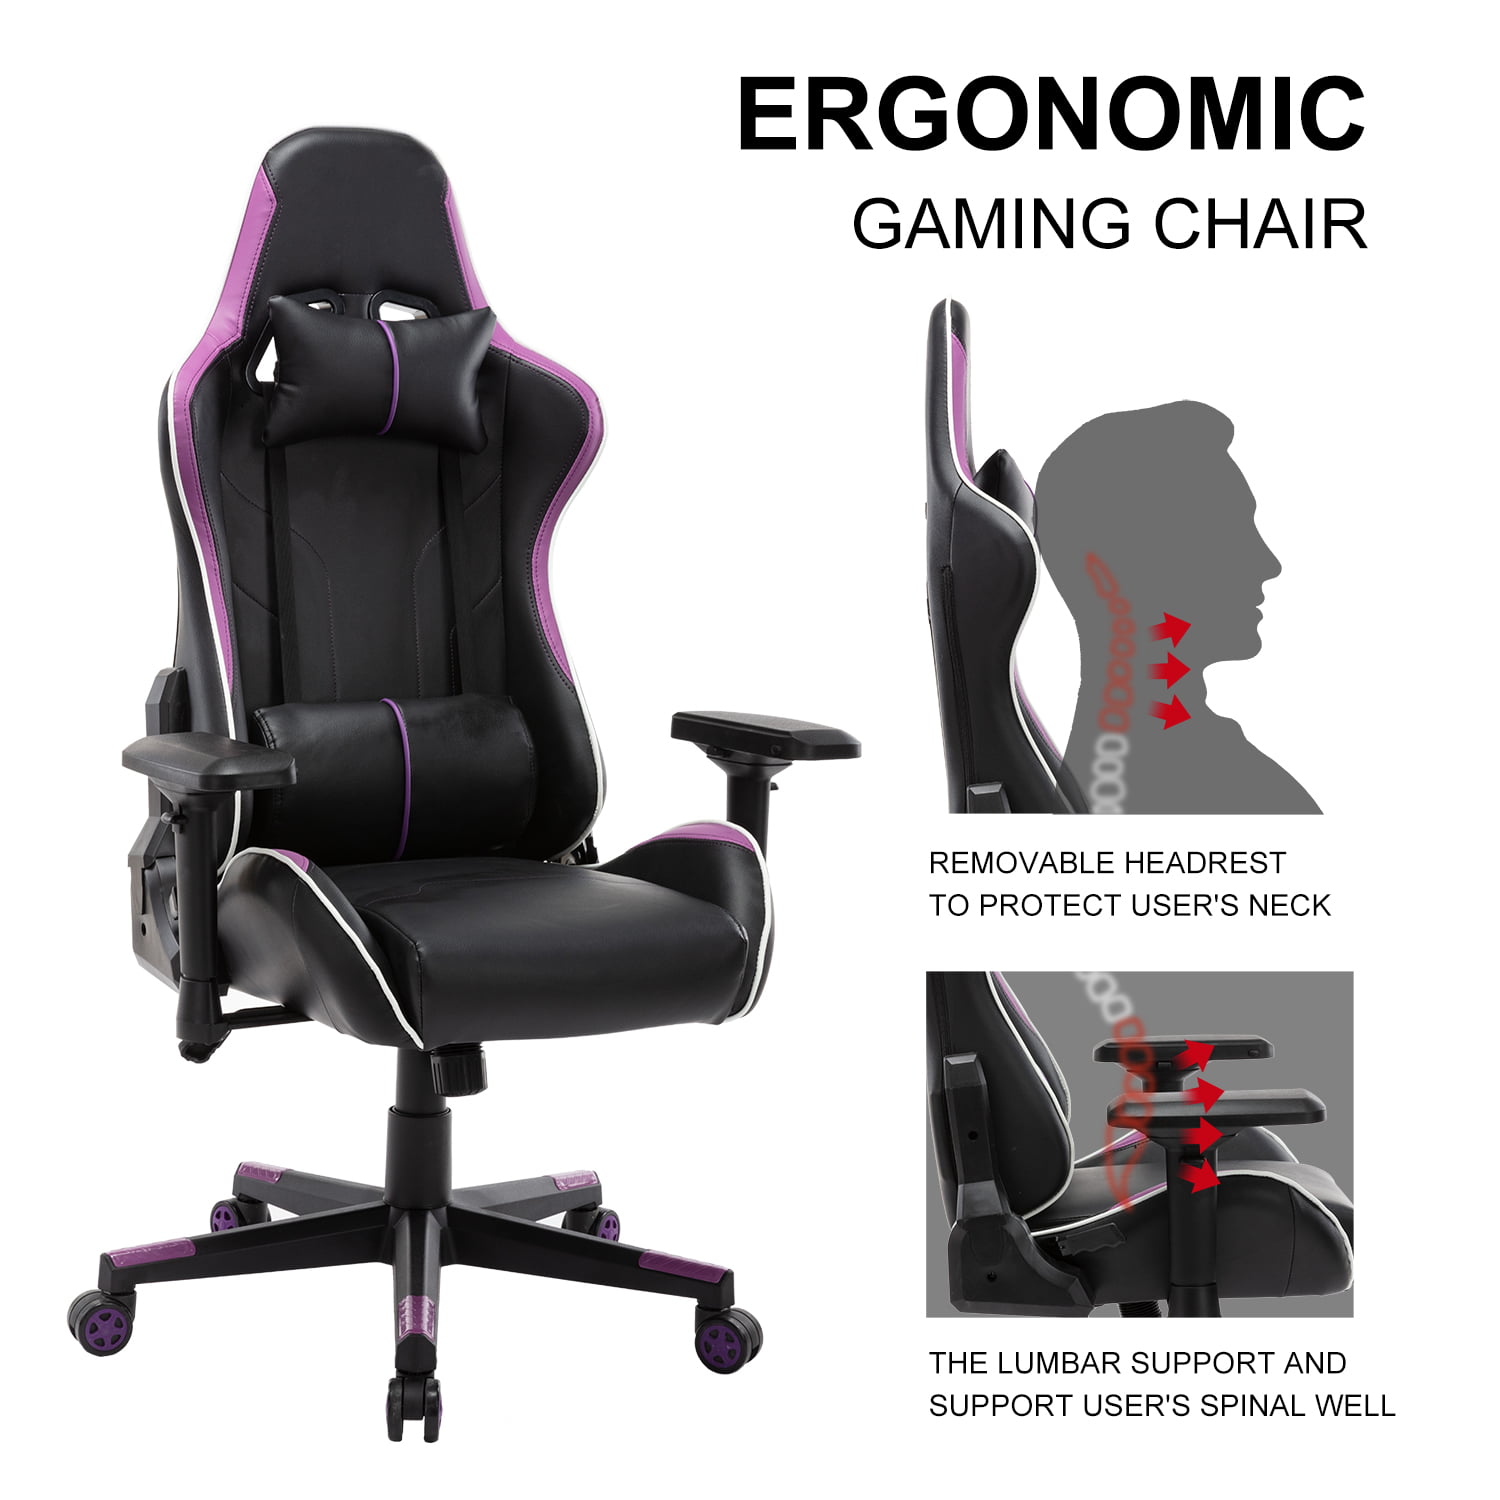 PULUOMIS Massage Gaming Chair White Swirl Computer Chair with Footrest White Lumbar Support & Headrest Adjustable Ergonomic Video Gaming Chair for Adults 